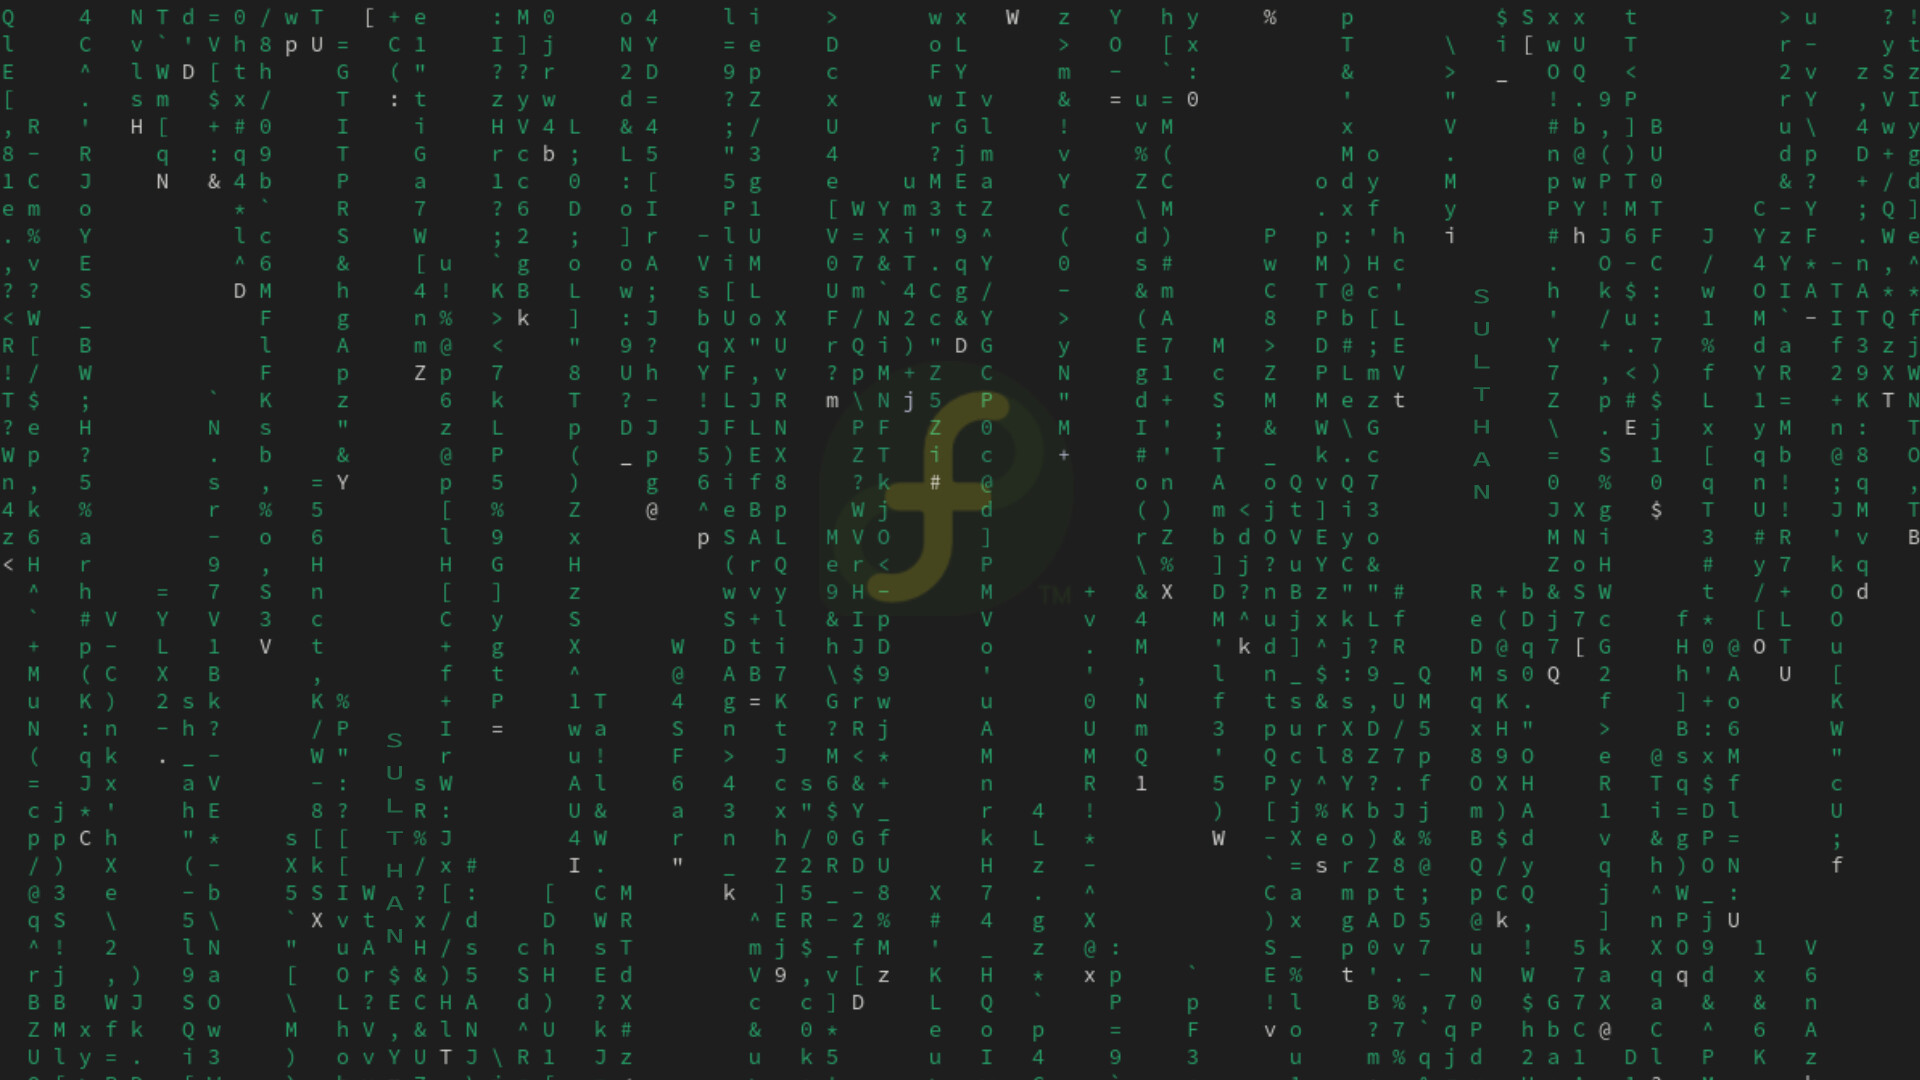 The Terminal Wallpapers